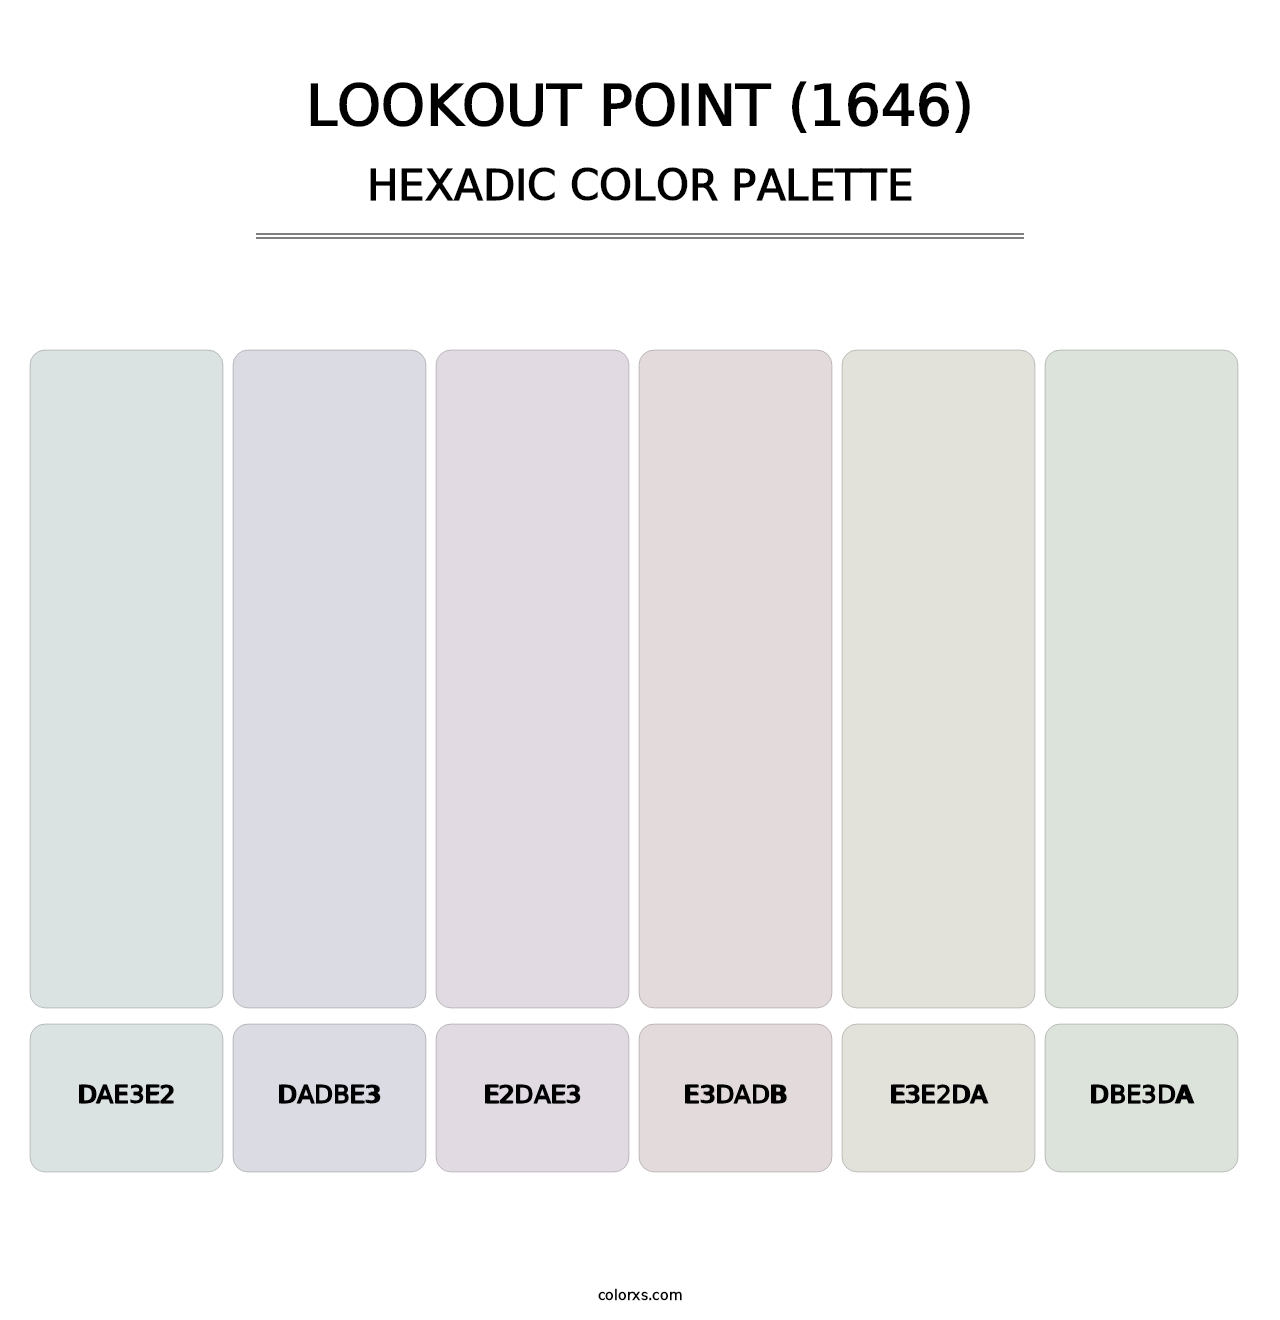 Lookout Point (1646) - Hexadic Color Palette